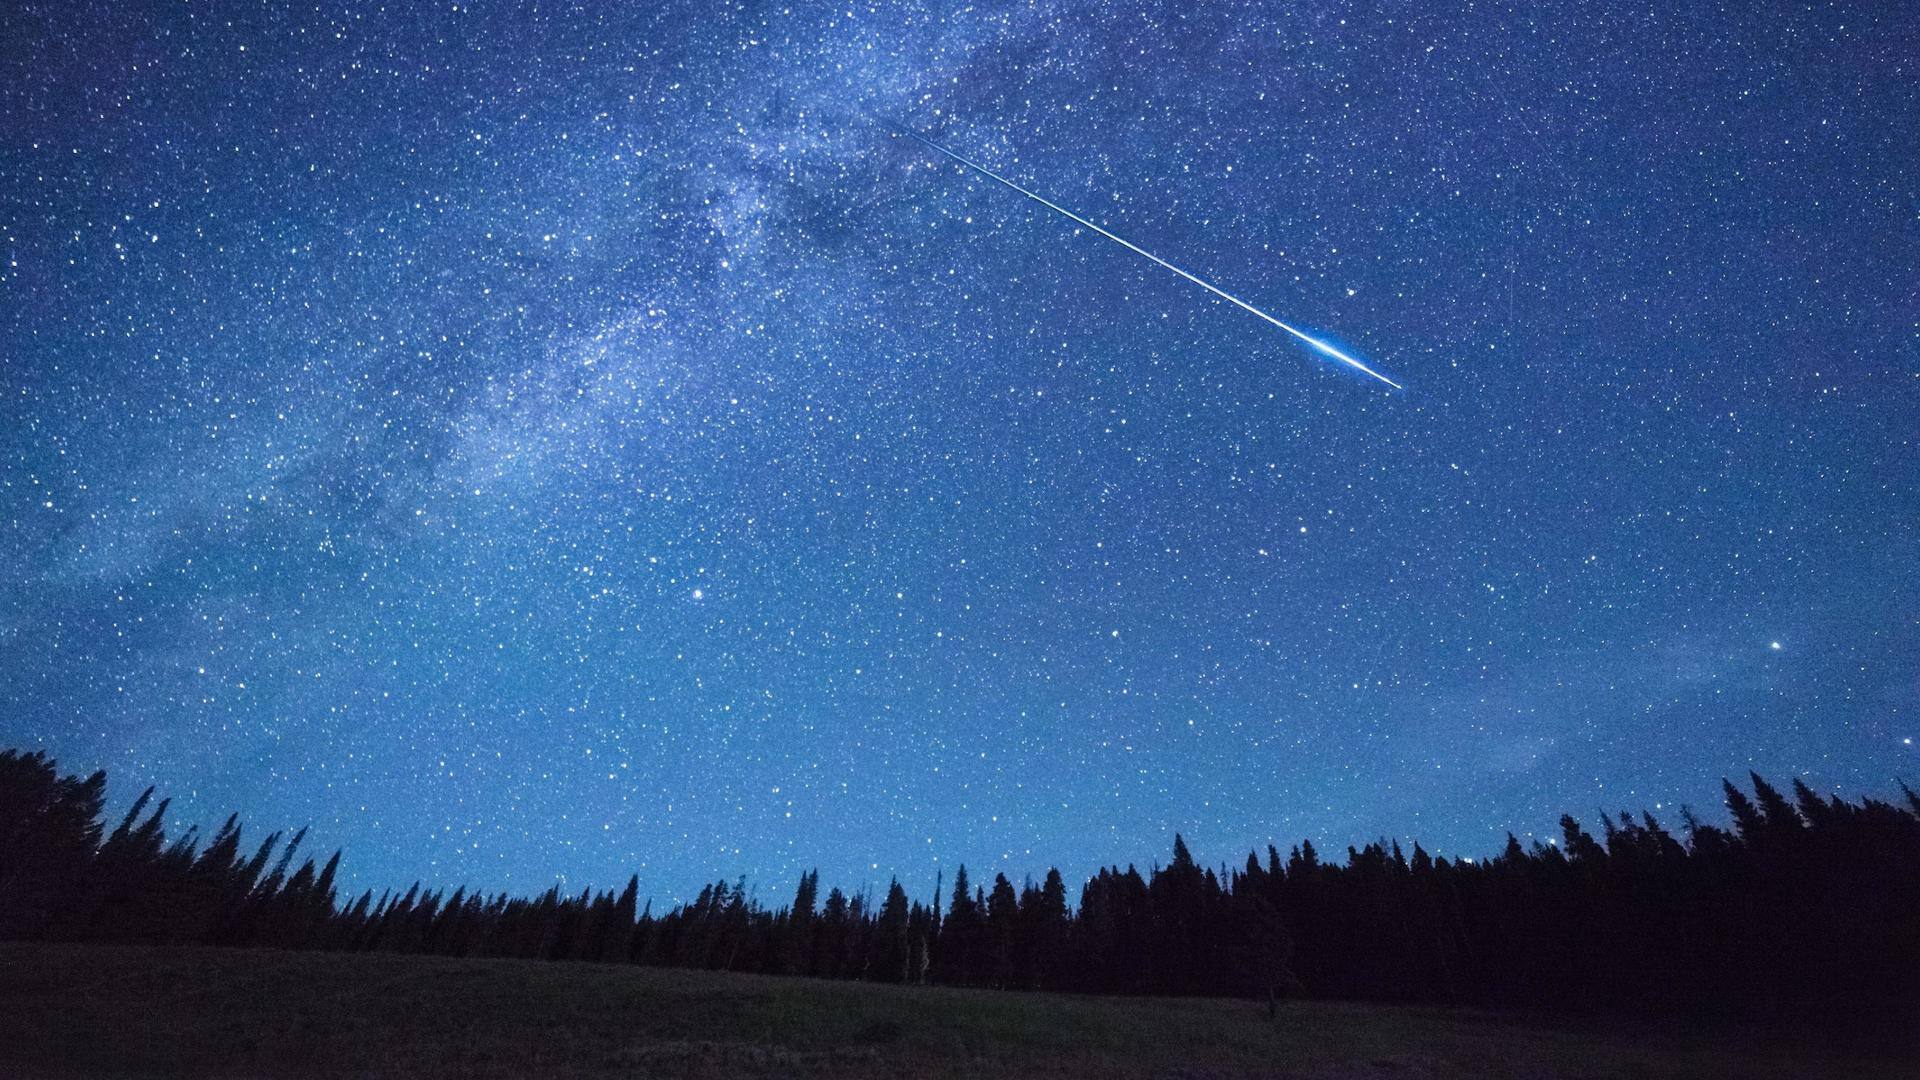 Leonid meteor shower: How and when to watch it?